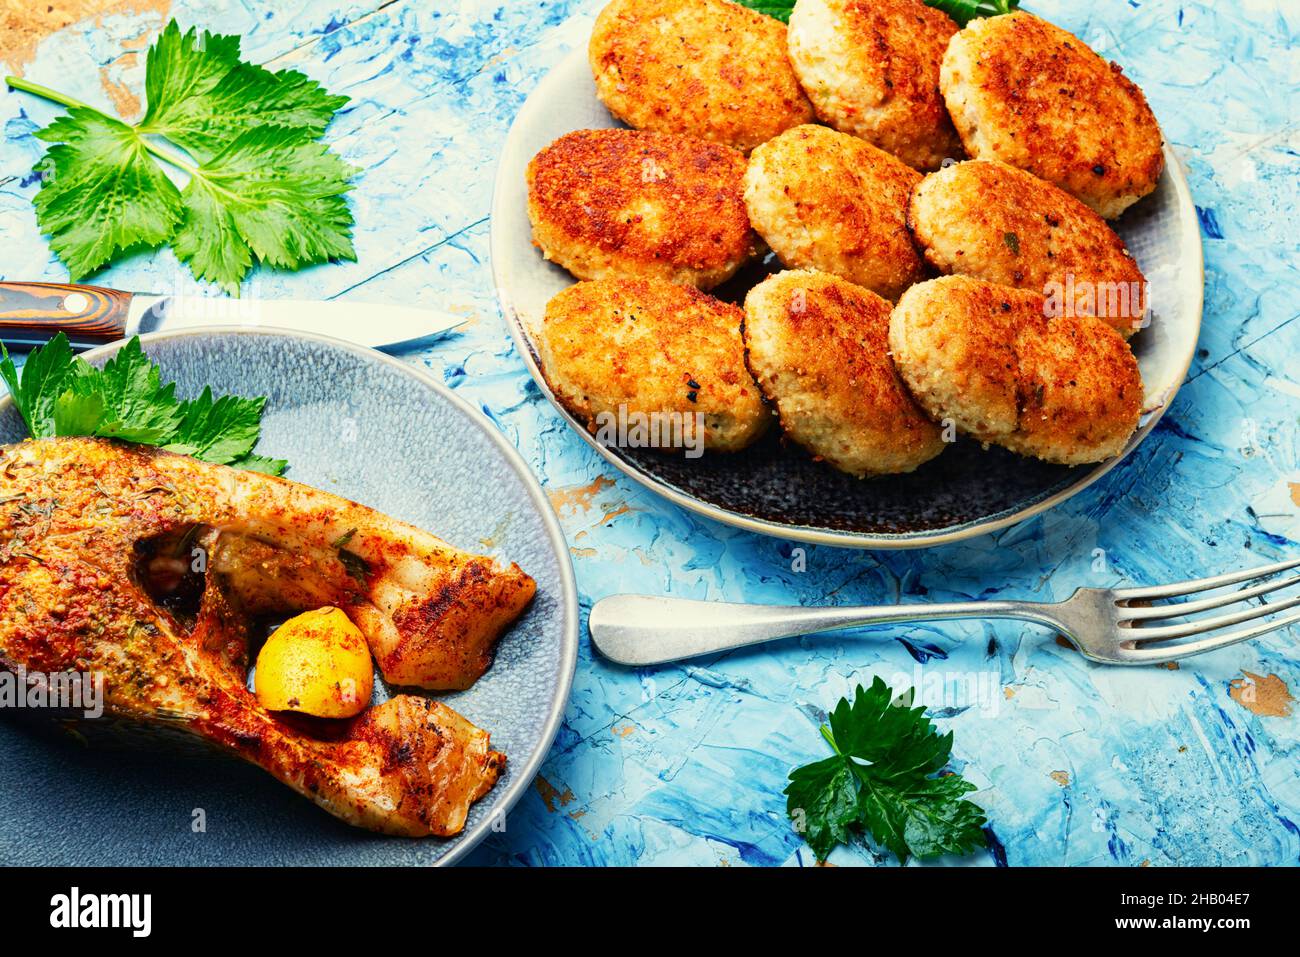 Homemade minced fish cutlets and fish steak Stock Photo